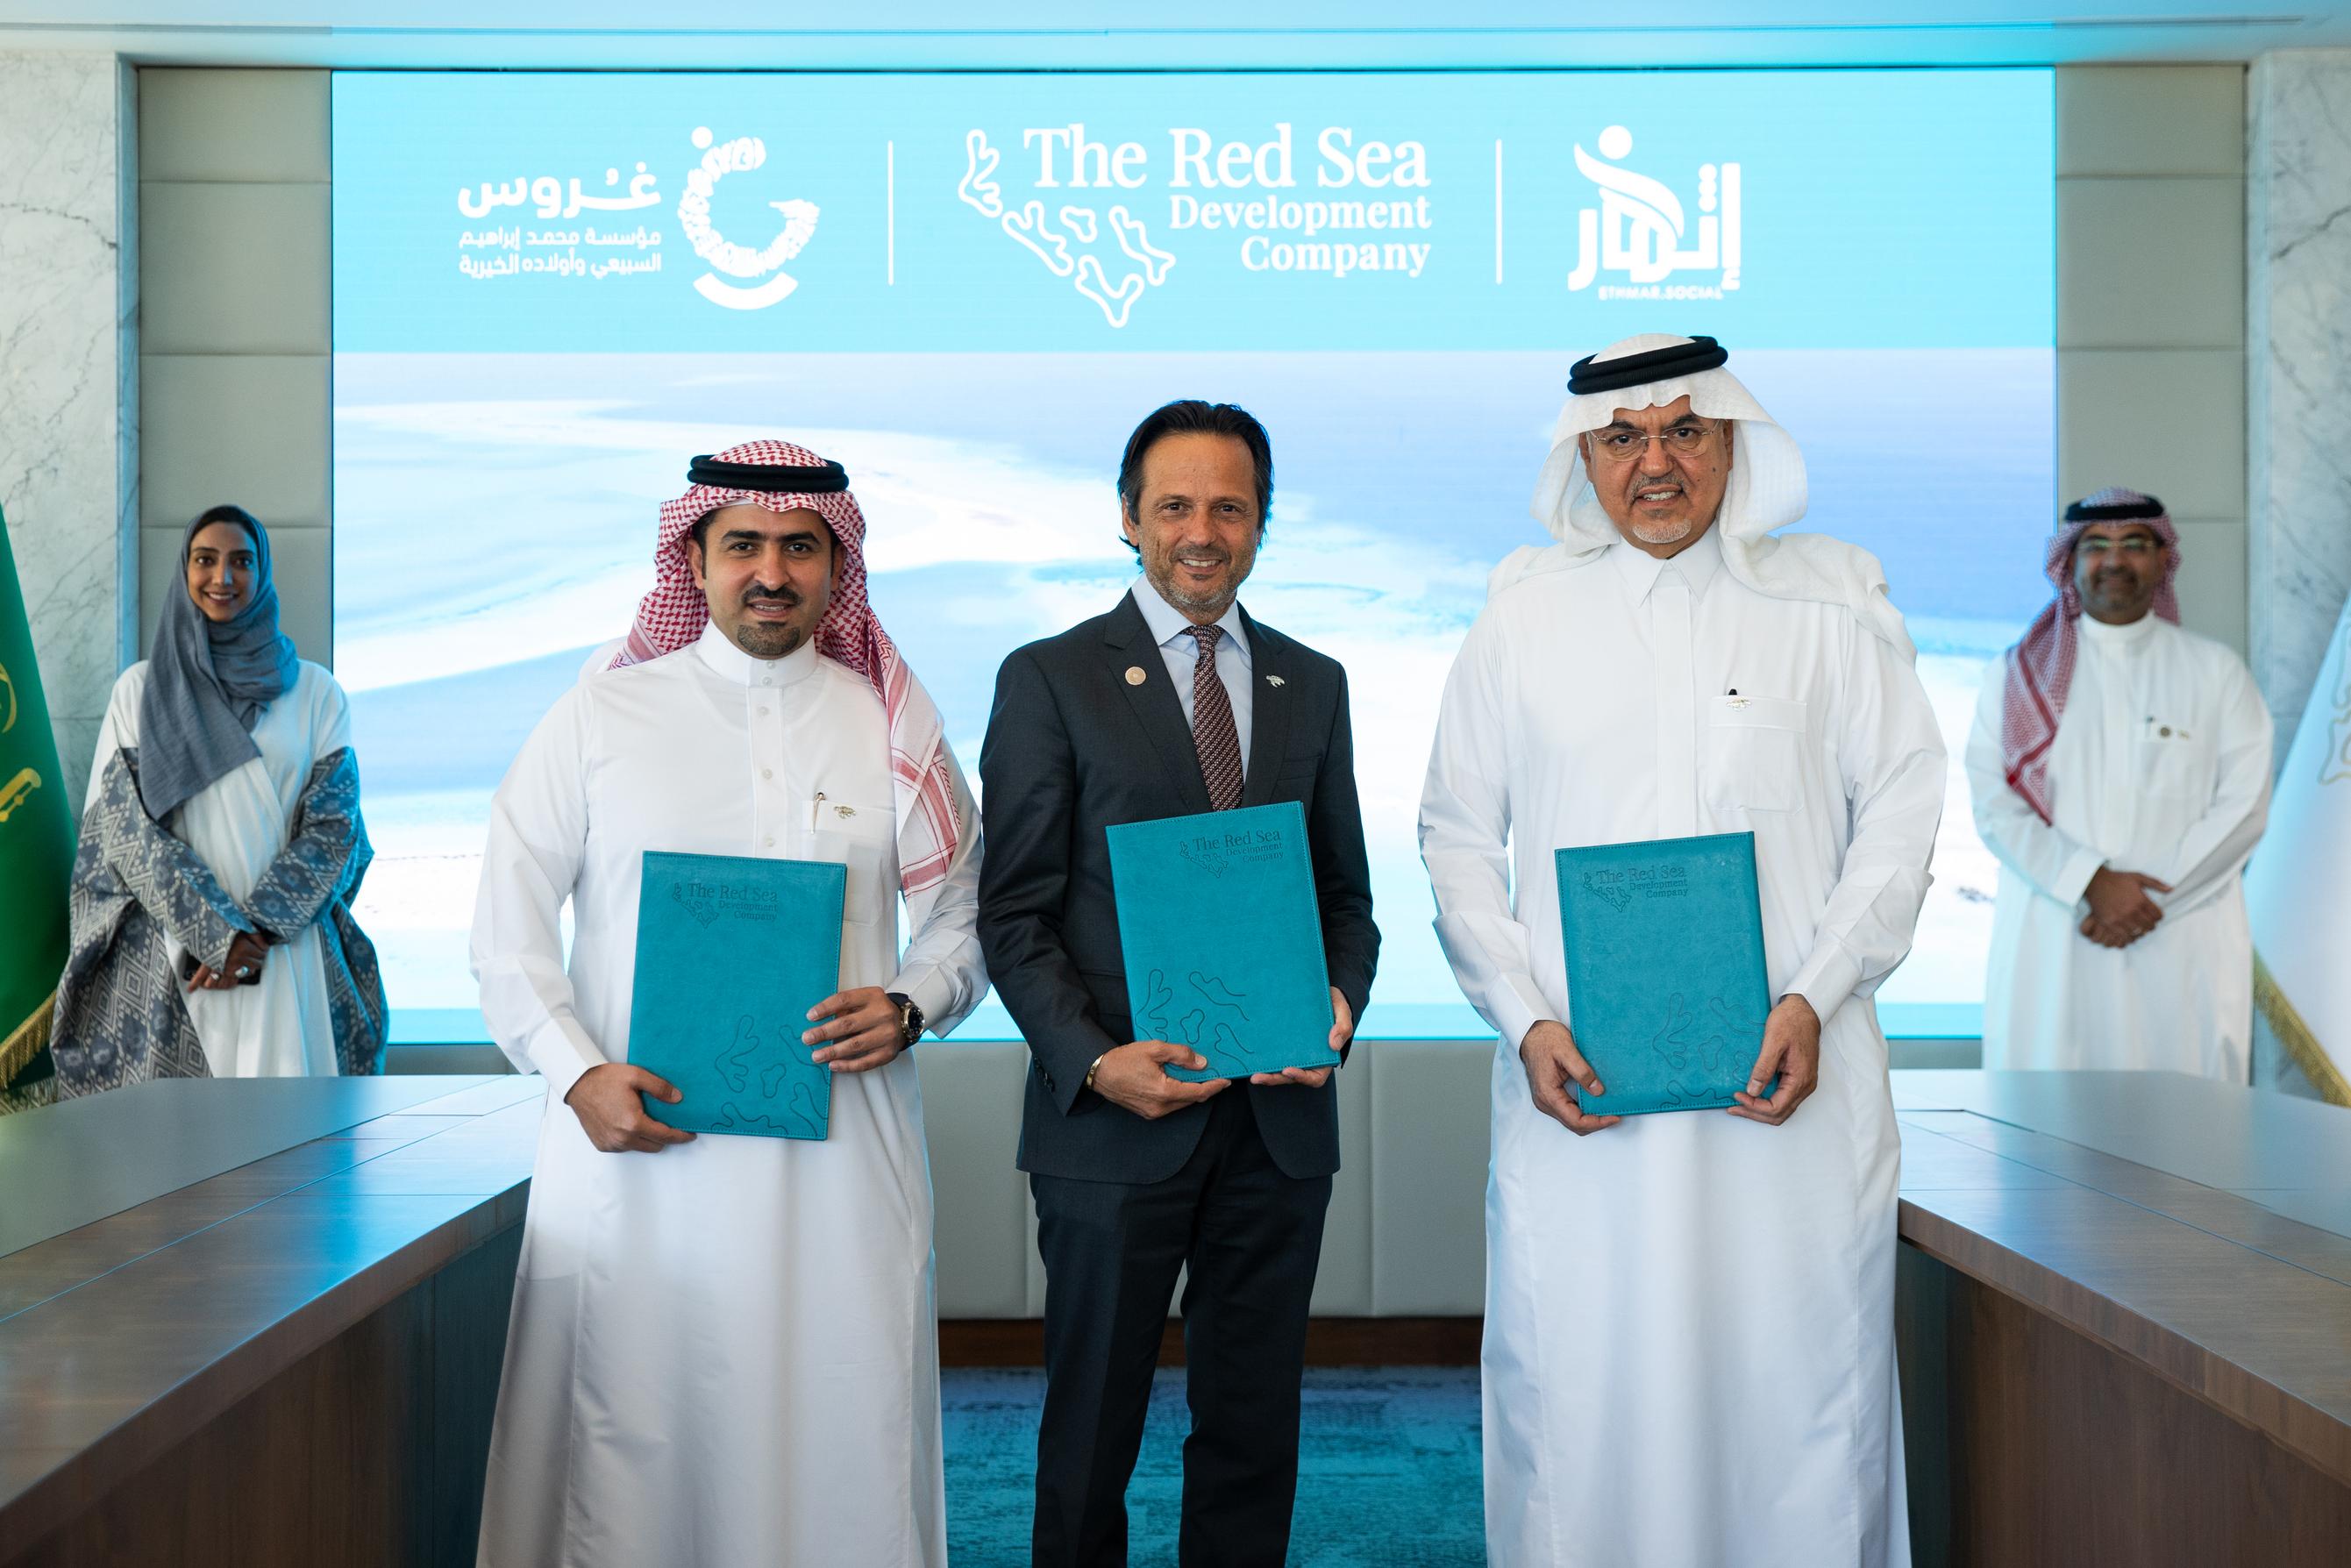 Red Sea Global Signs MoU with Ethmar and Ghoroos to Deliver Social Transformation